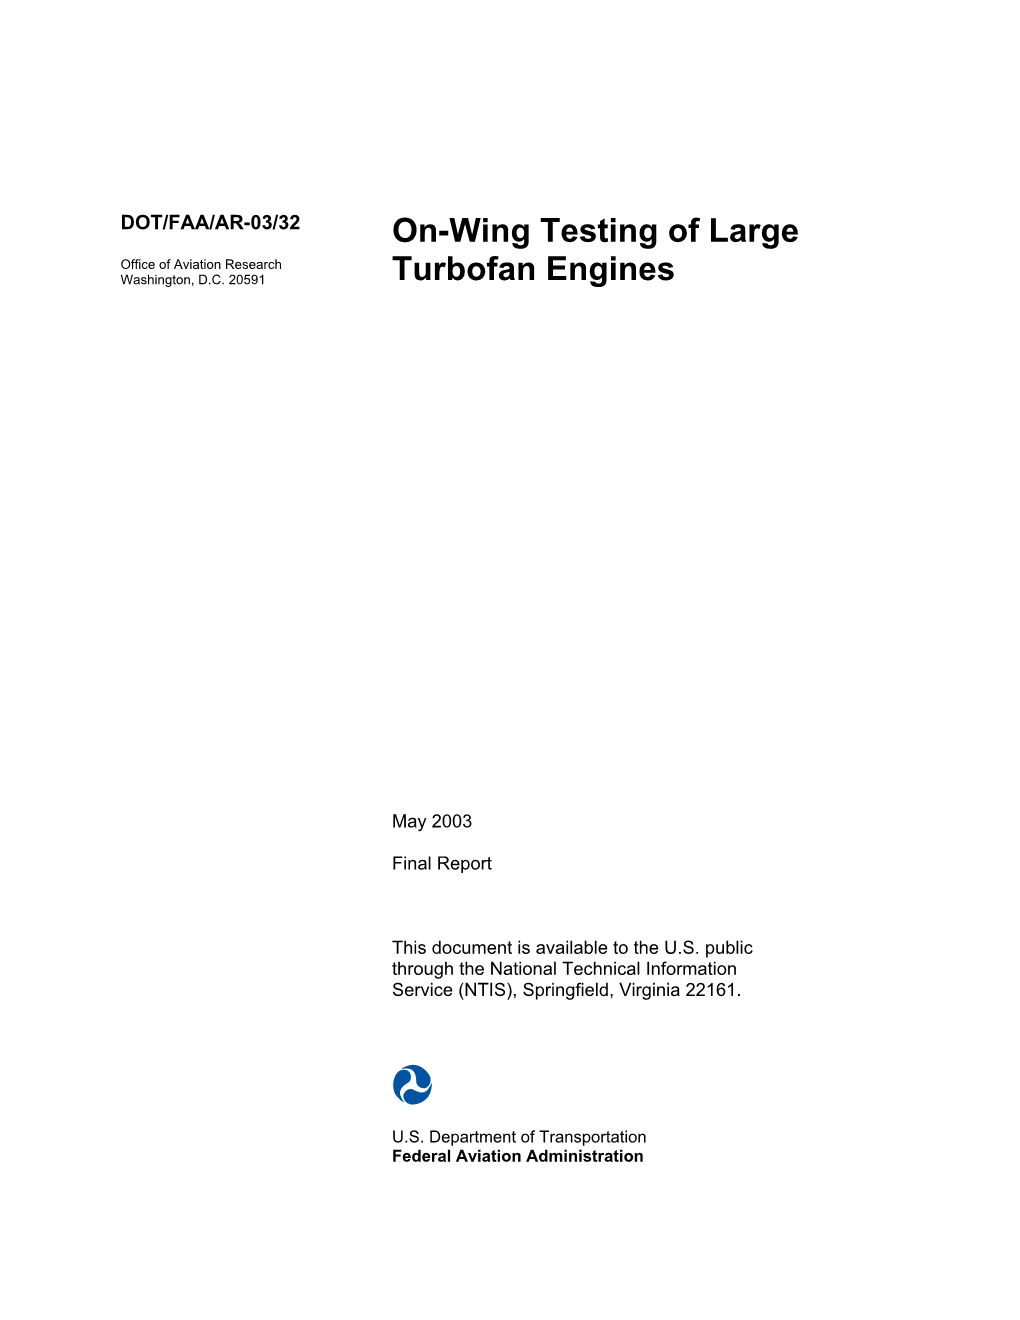 ON-WING TESTING of LARGE TURBOFAN ENGINES May 2003 6